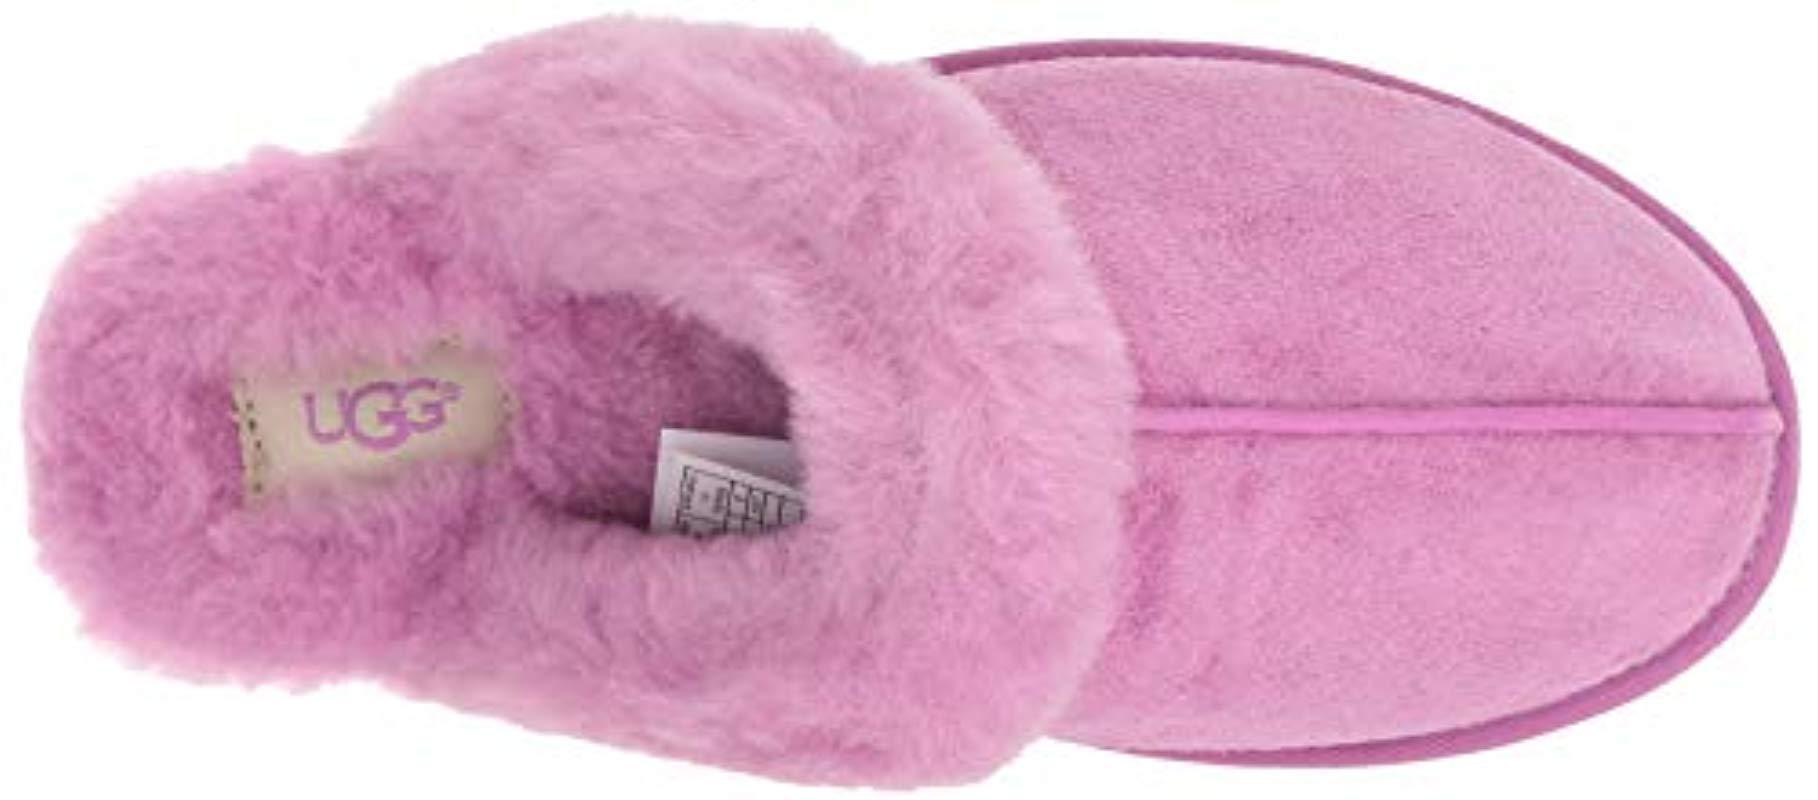 Ugg Scuffette Slippers Bodacious Online, SAVE 51%.